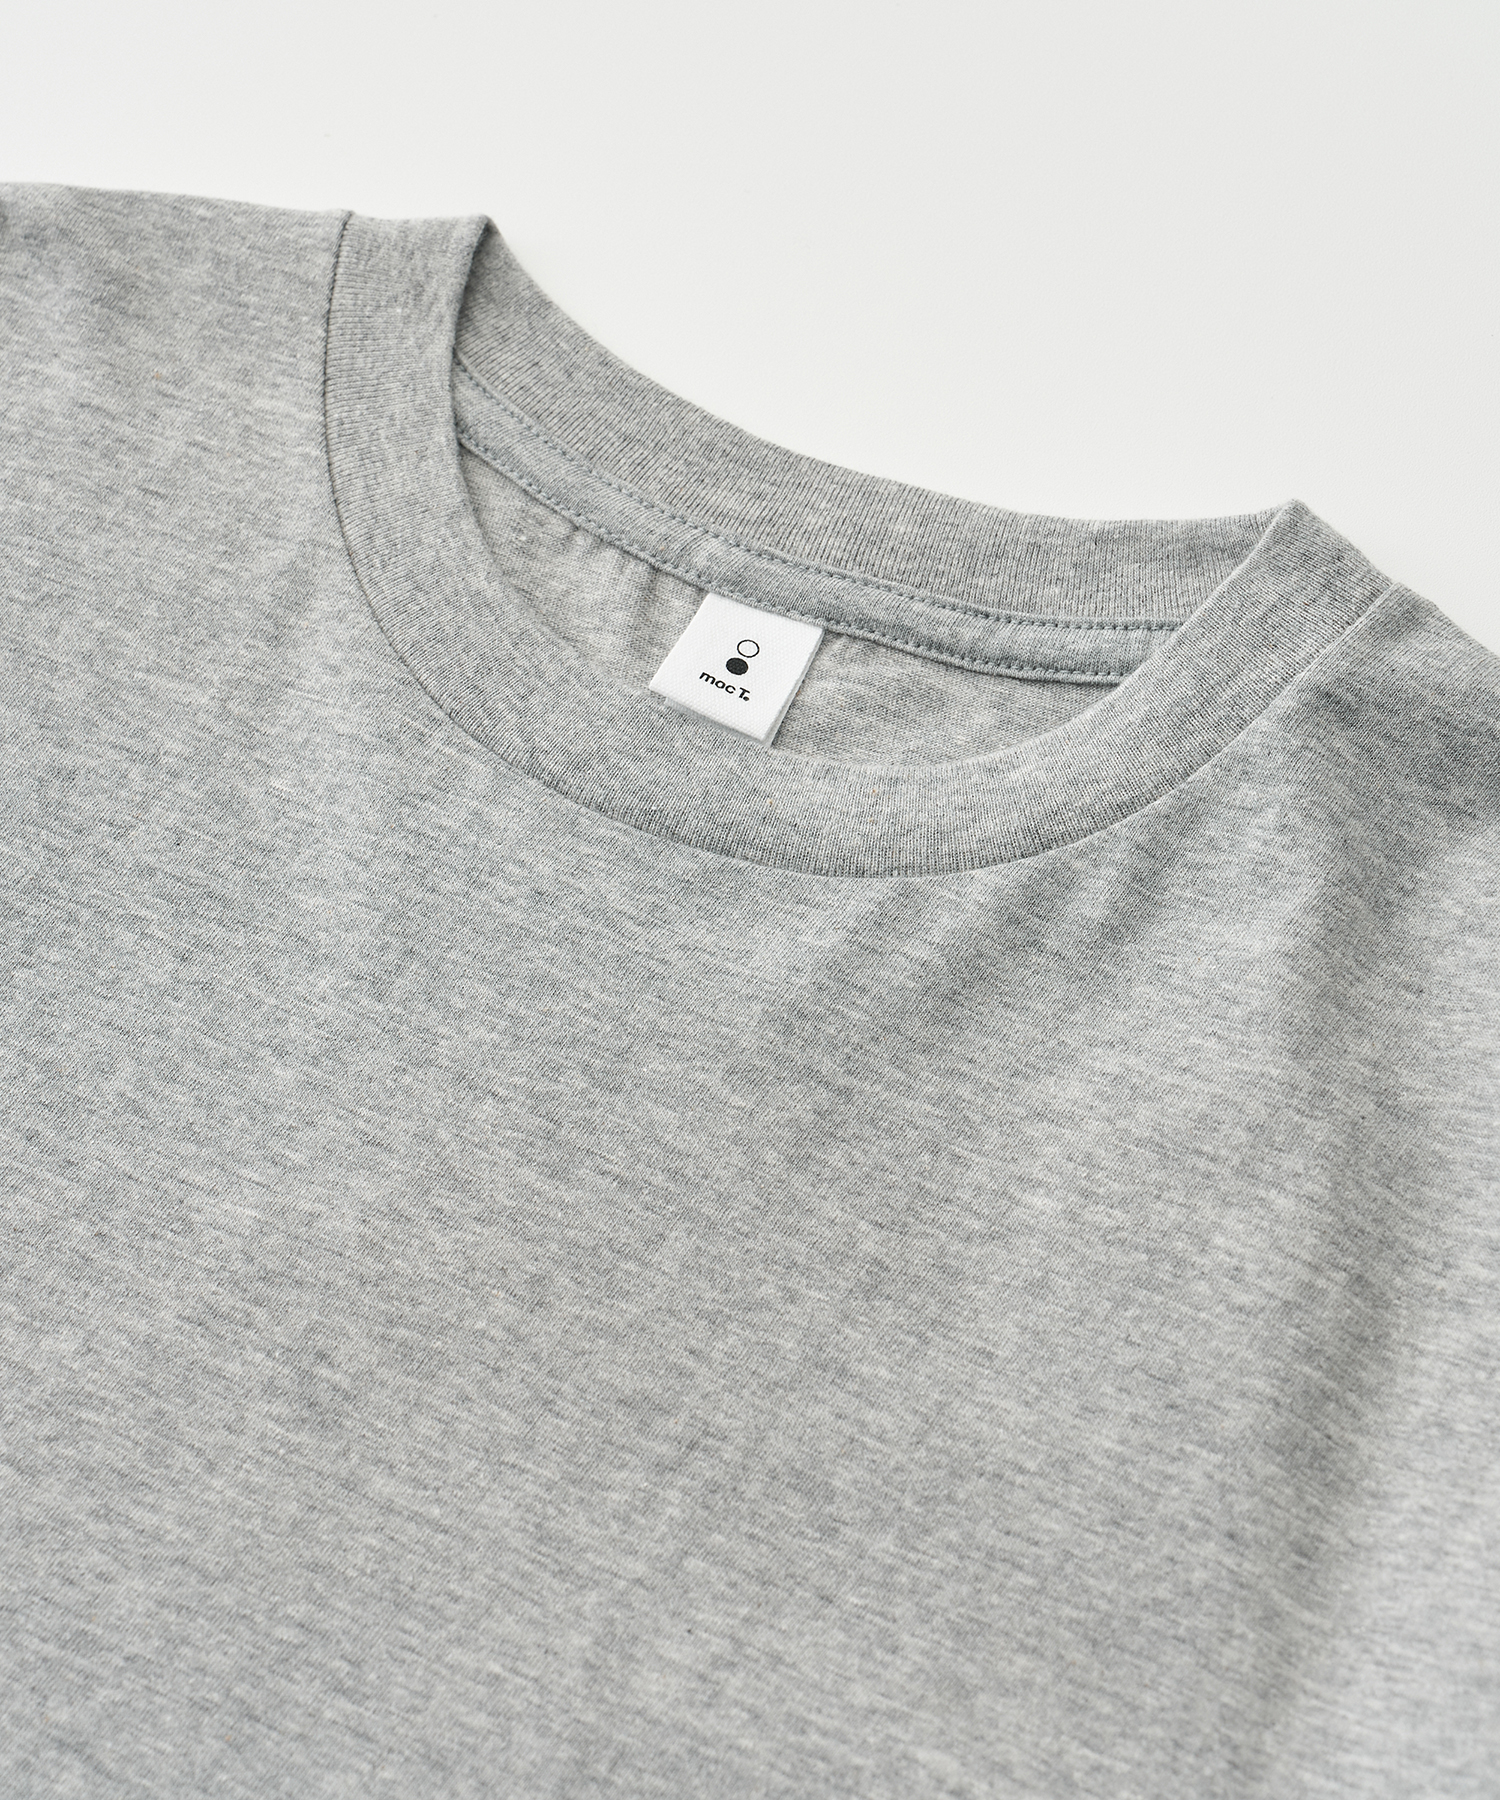 Loose Fit S/S Pocket Tee (Heather Gray)